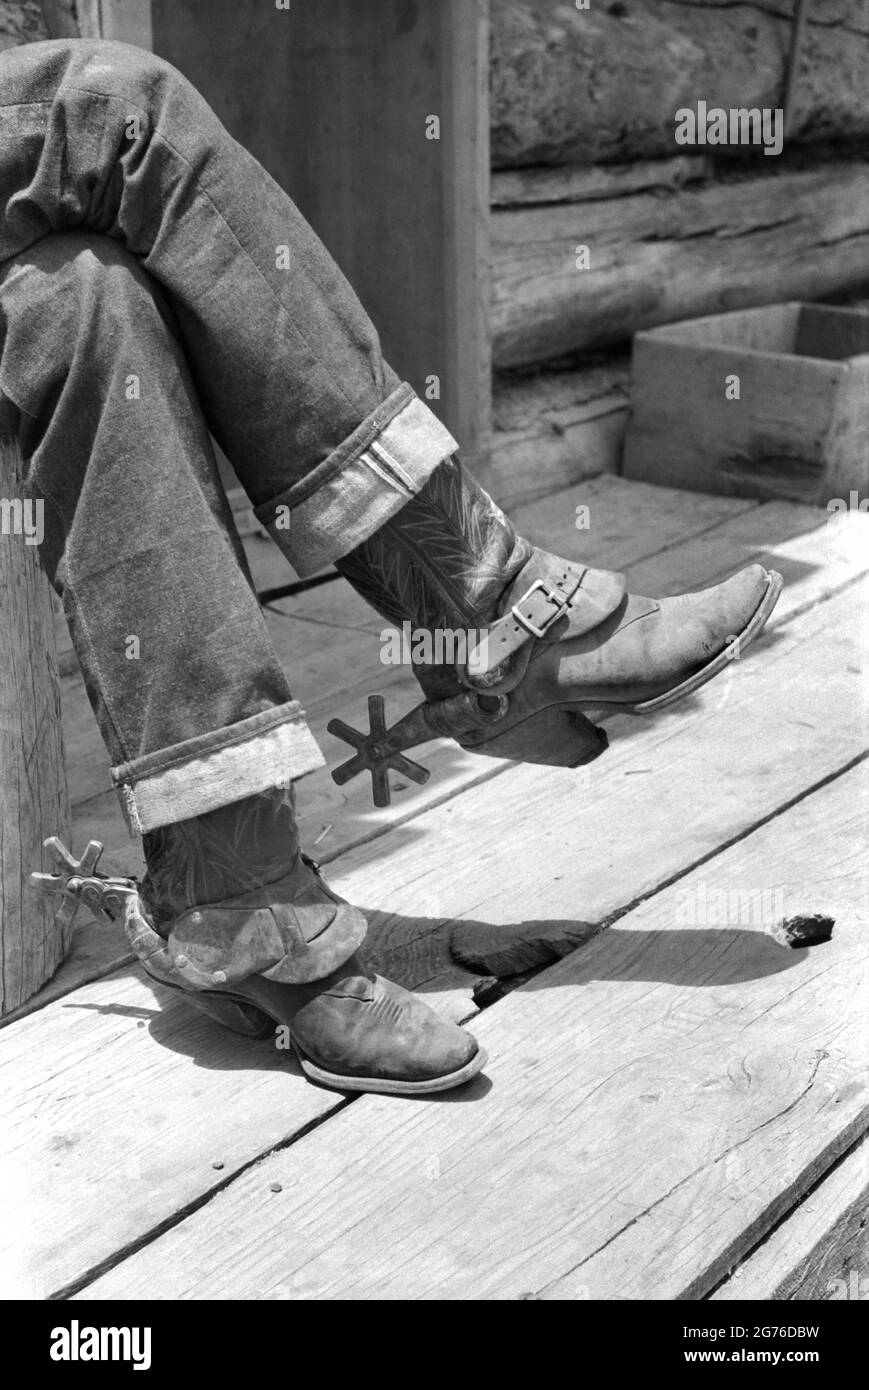 Detail of Farmer's Blue Jeans, Boots and Spurs, Pie Town, New Mexico, USA, Russell Lee, U.S. Farm Security Administration, June 1940 Stock Photo